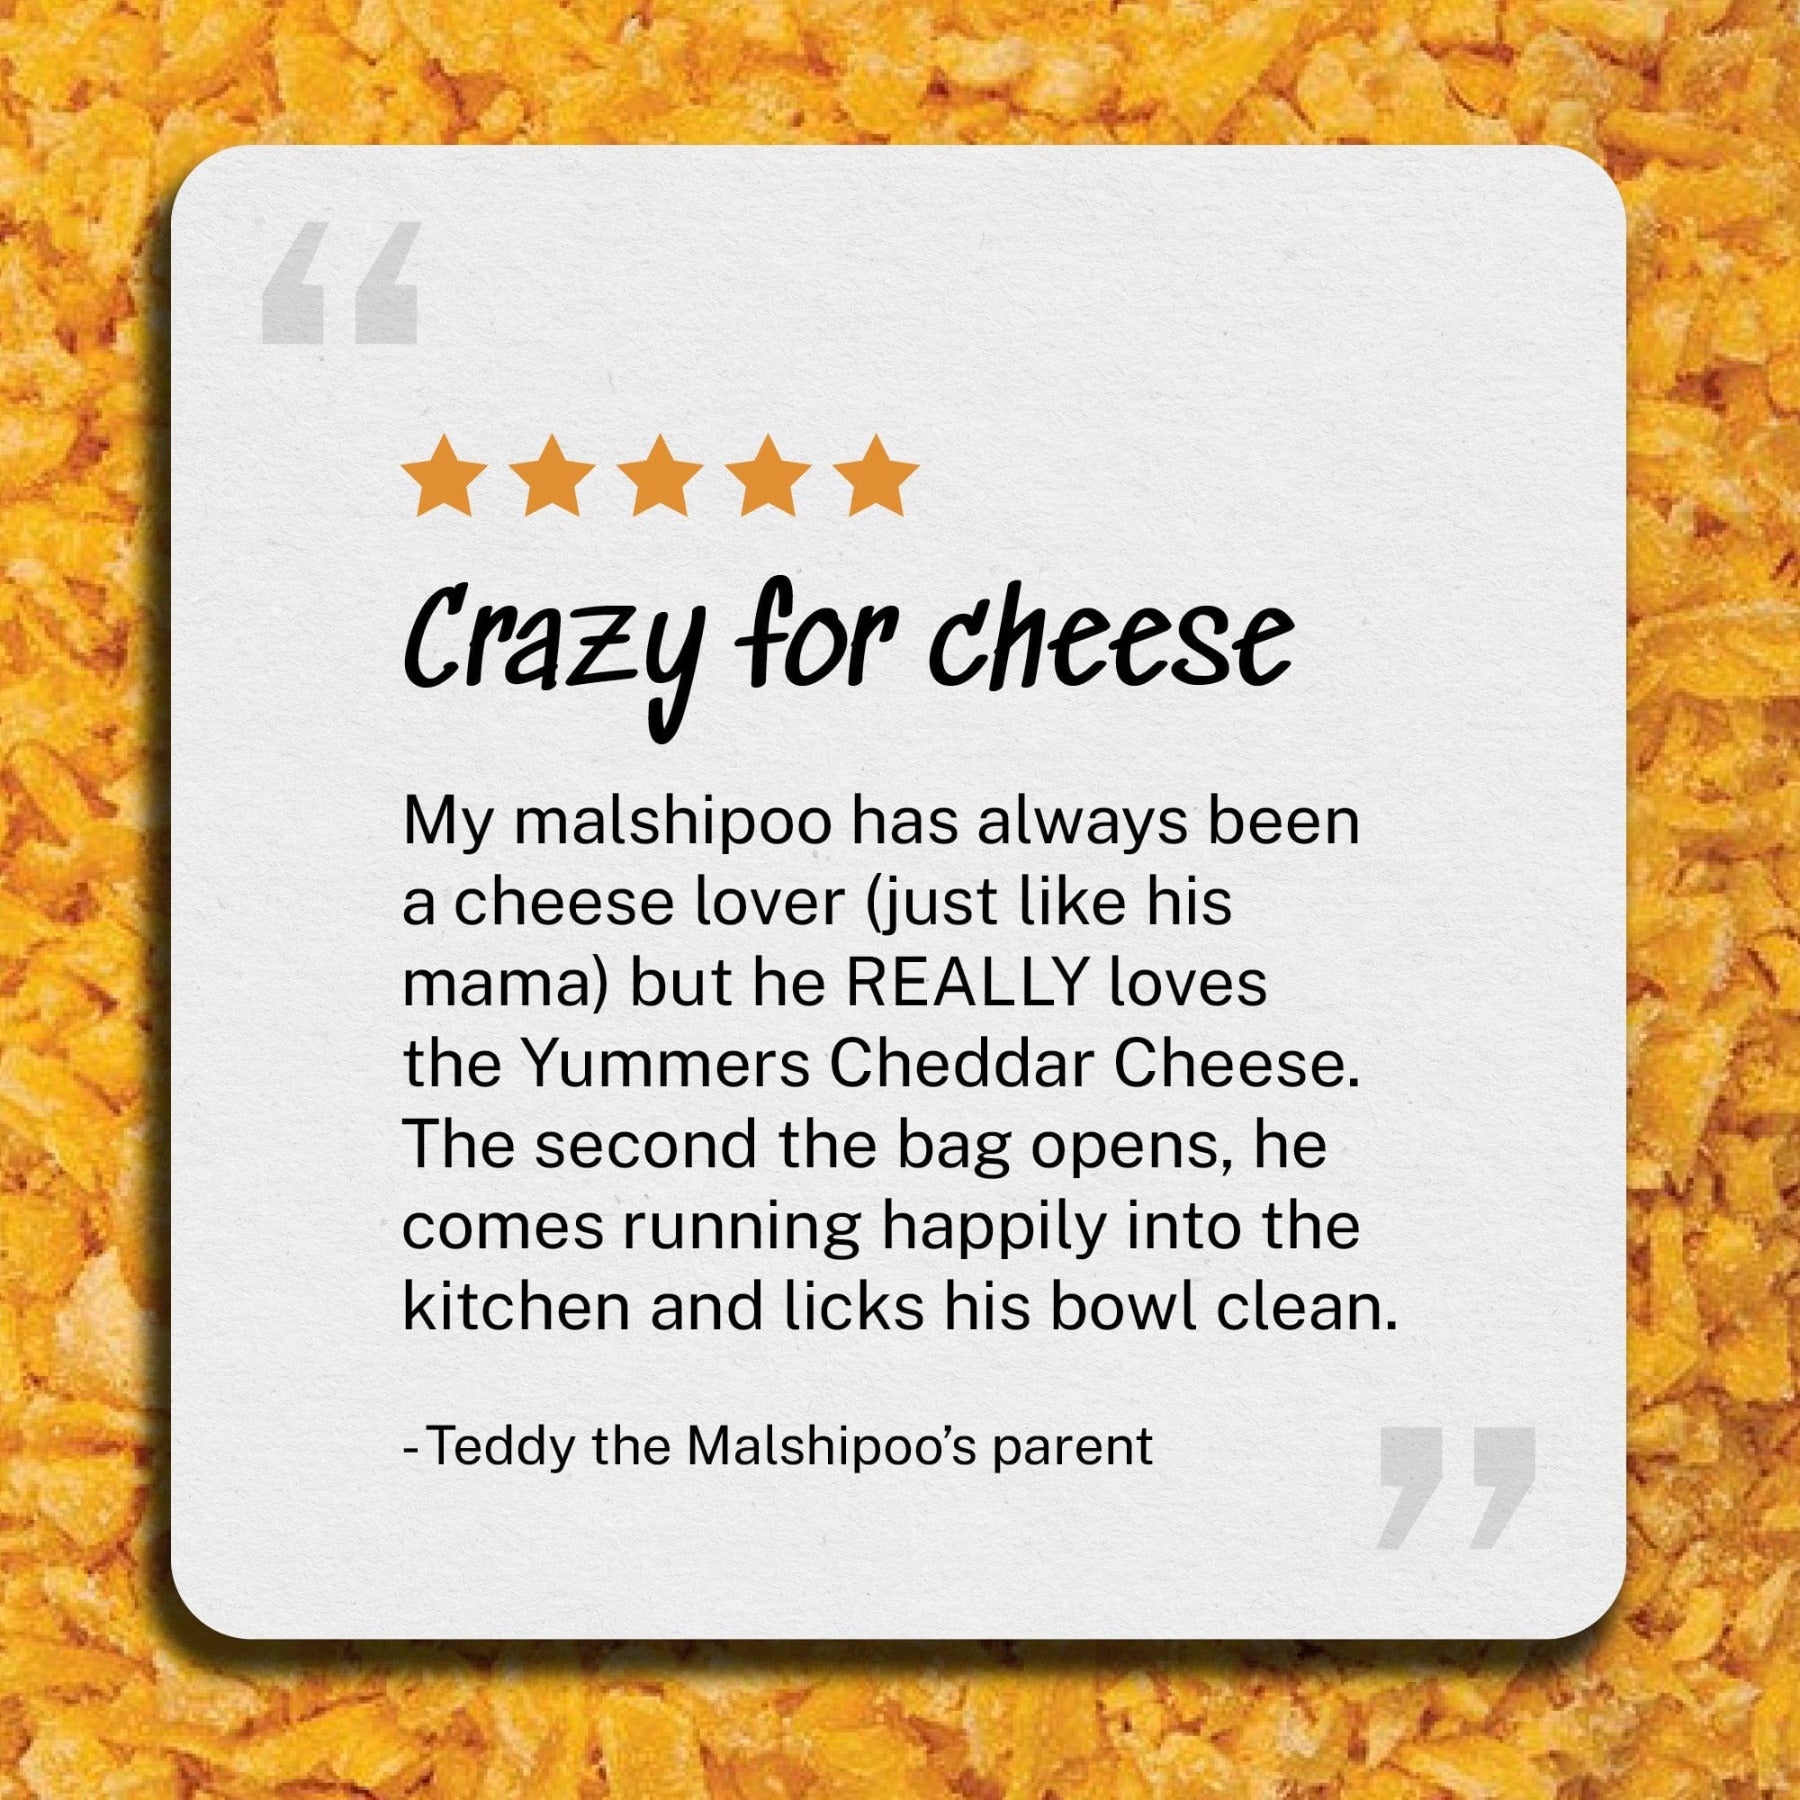 Review: Crazy for cheese - My malshipoo has always been a cheese lover (just like his mama) but he REALLY loves the Yummers Cheddar Cheese. The second the bag opens, he comes running happily into the kitchen and licks his bowl clean. - Teddy the Malshipoo’s parent